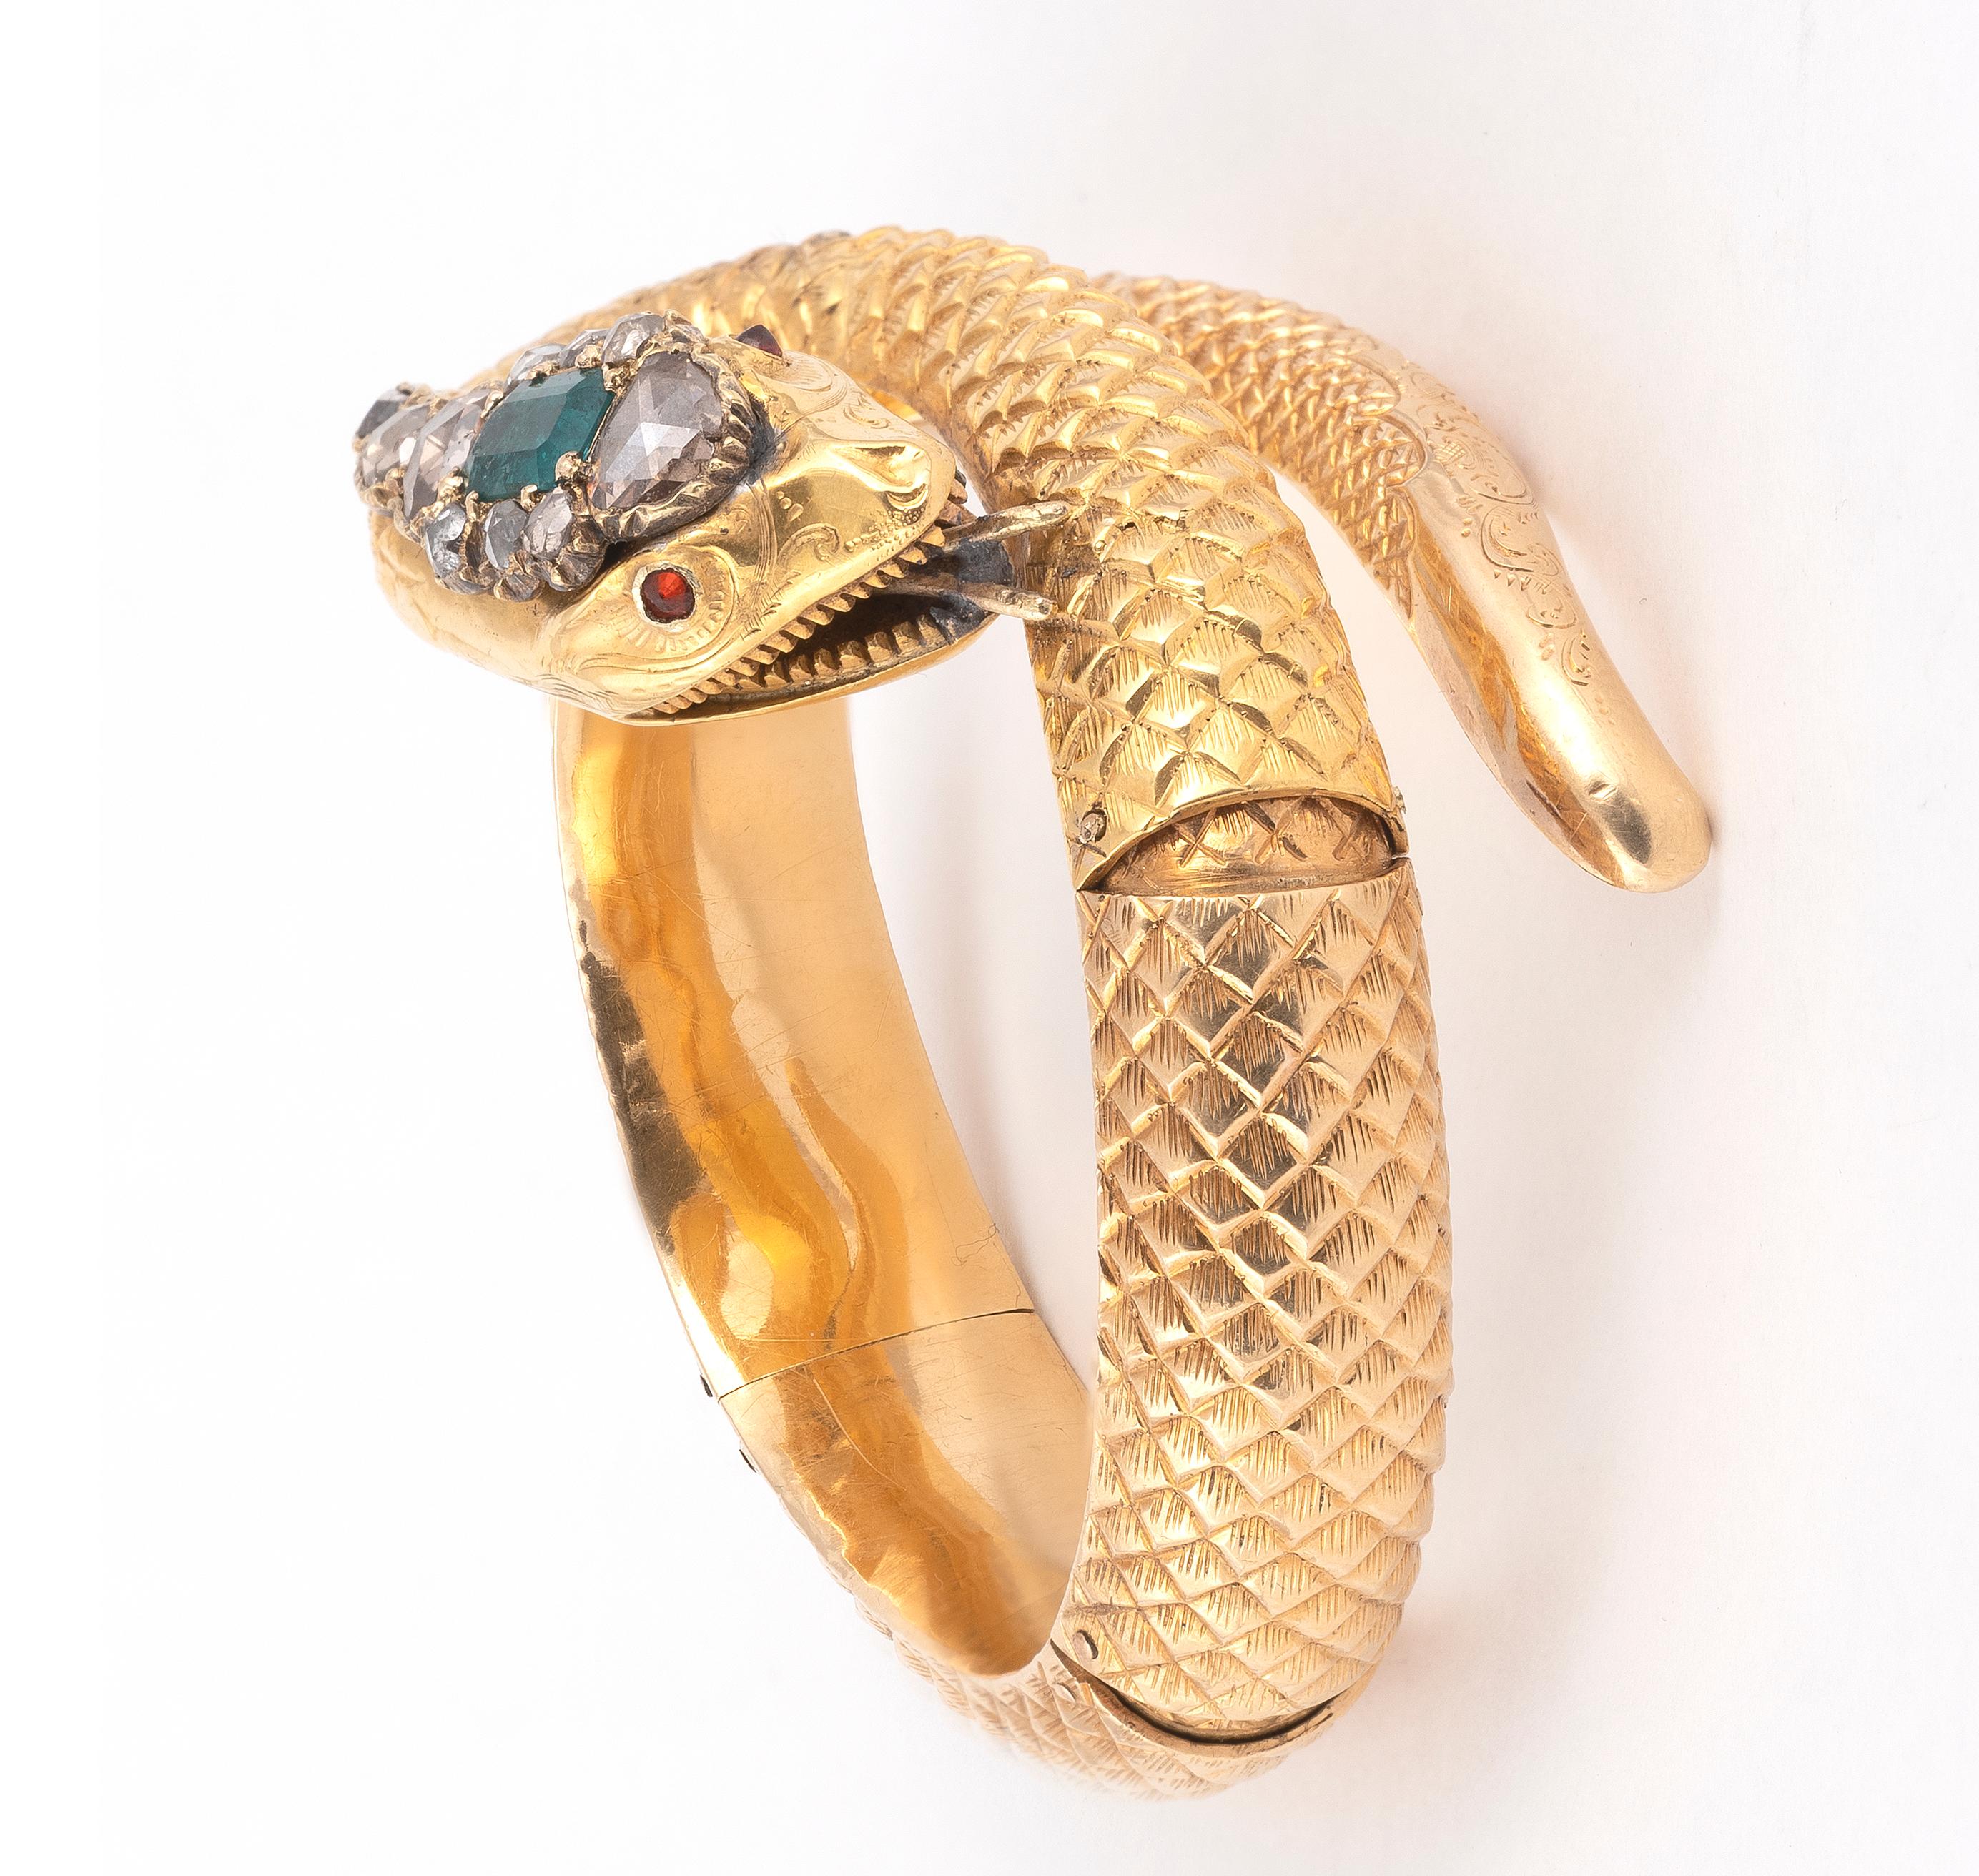 Antique bracelet presenting a snake with a chiselled and textured decoration. Its head is adorned with an emerald and rose-cut diamonds, its eyes composed of red stones. Set in 18K yellow gold. Wrist circumference: 17cm. French mark's.Gross weight: